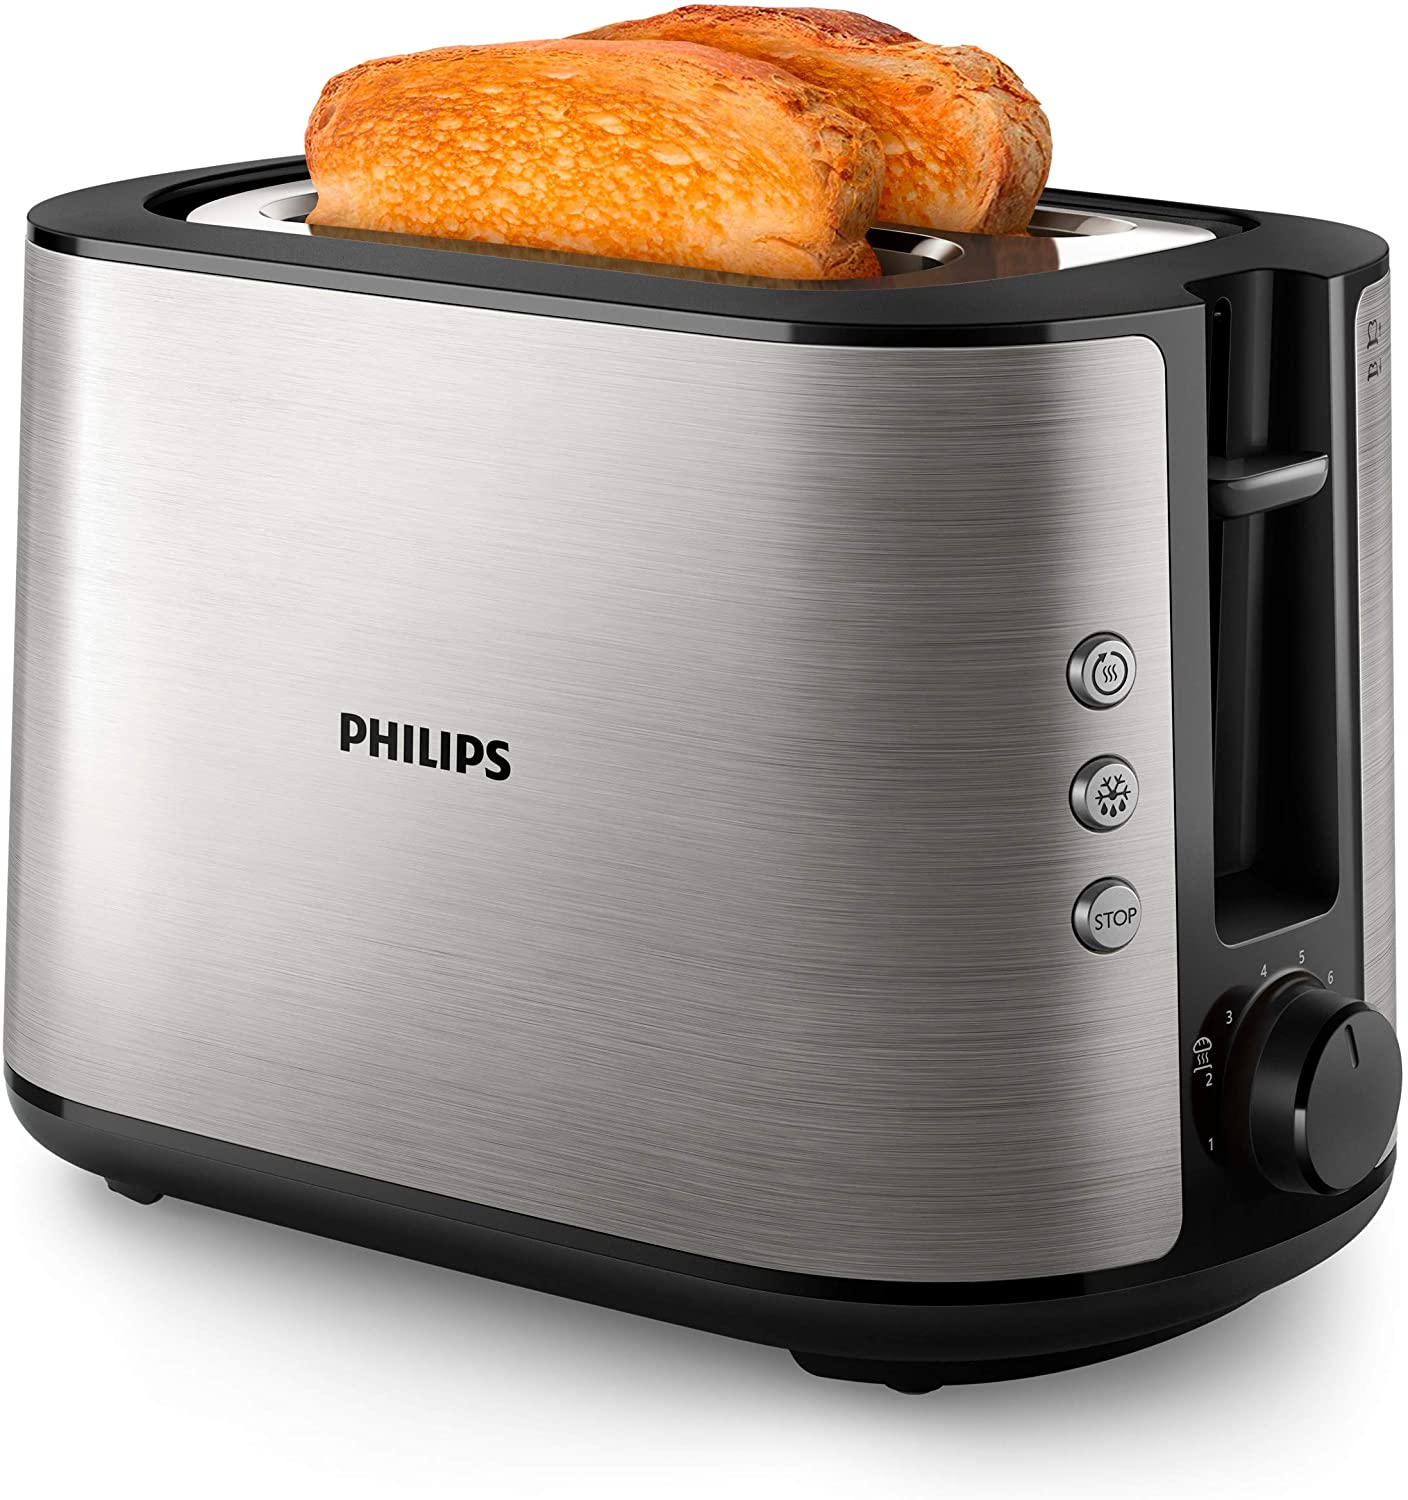 Philips HD2650/90 Toaster Stainless Steel (950 W, 8 Browning Levels, Bun Attachment, Defrosting and Warming Function, Stop Button, Lift Function) Stainless Steel